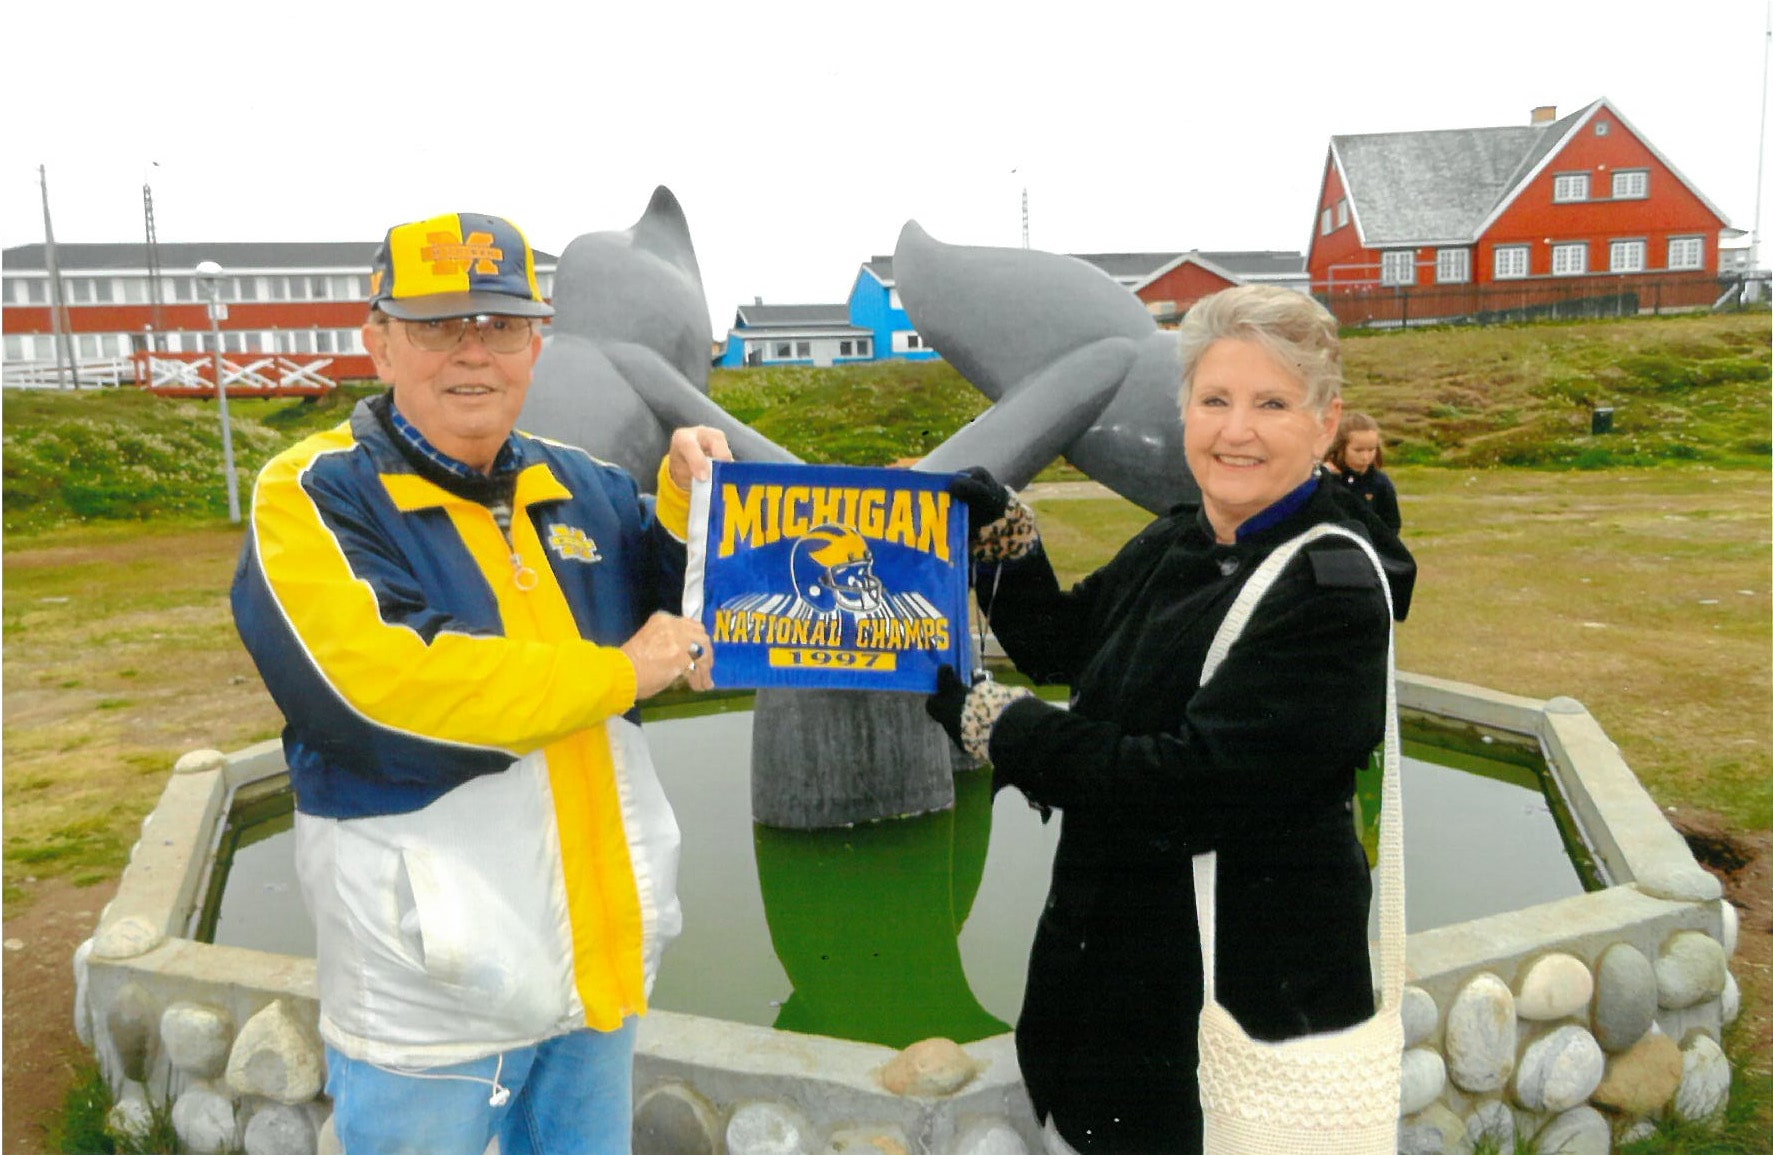 Jack, ’60, and Carol Zurawka, ’63, proudly displayed the Maize and Blue in Greenland during their July 2016 cruise tour.